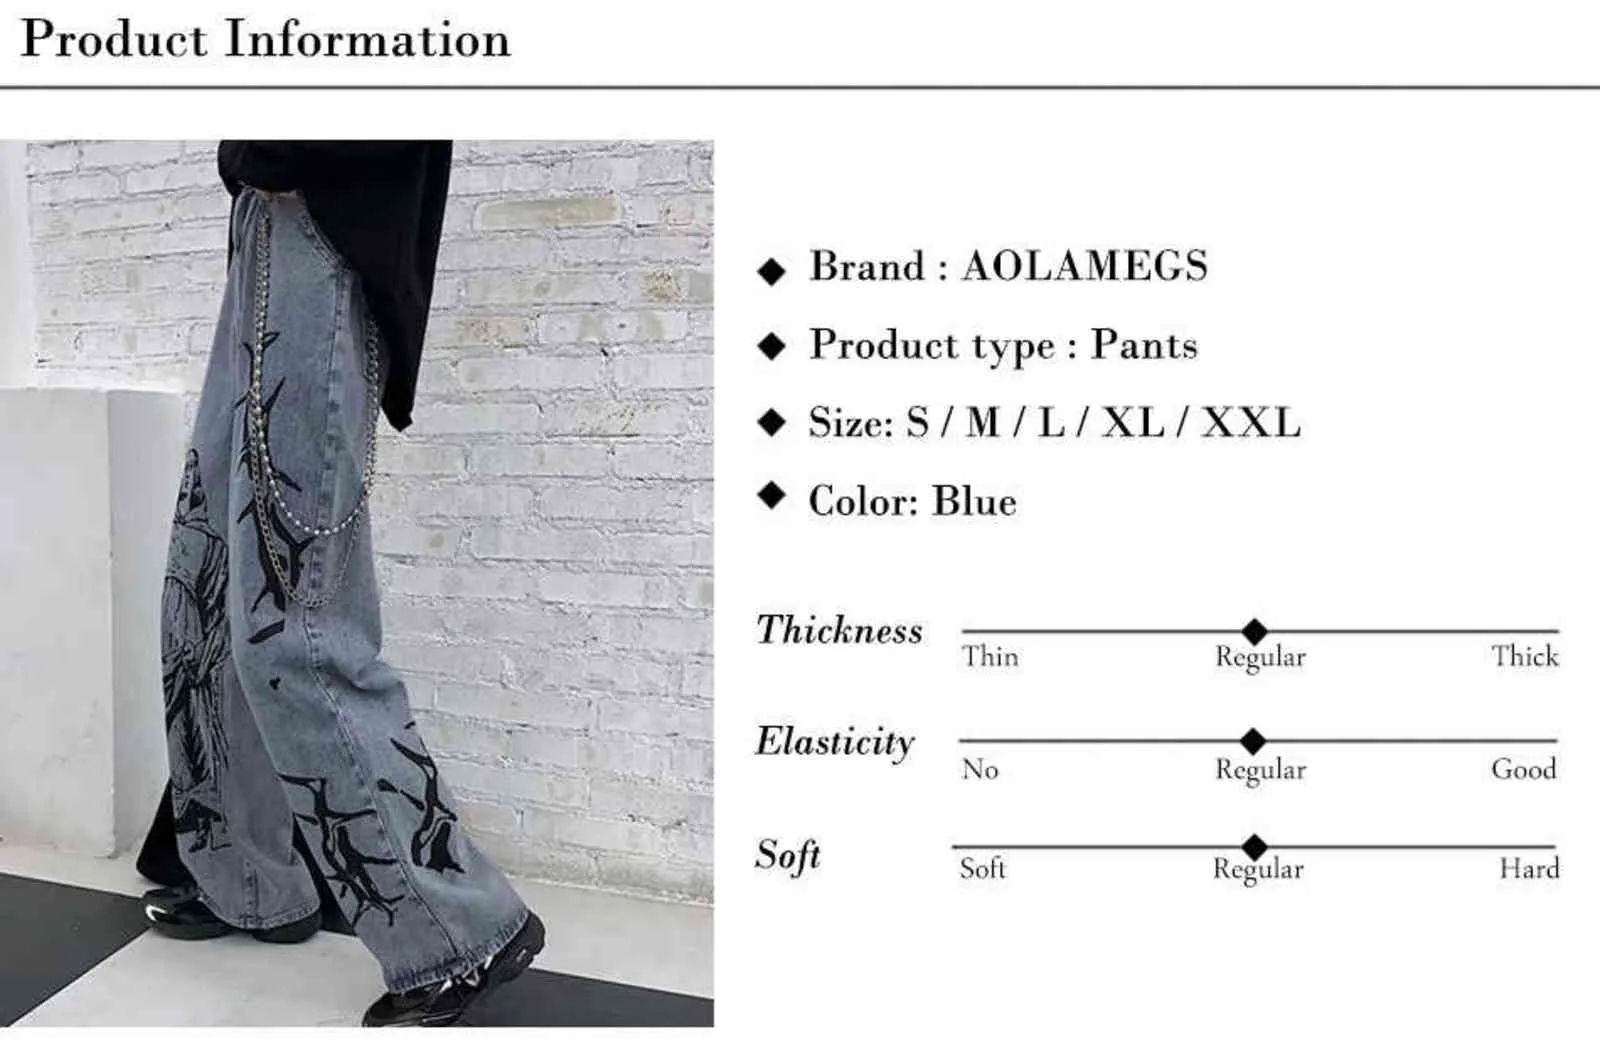 Mens Casual Print Baggy Homme Jeans Korean Retro Wide Leg Anime Denim Pant  For Harajuku Hip Hop Craghoppers Trousers 211111 From Mu03, $24.26